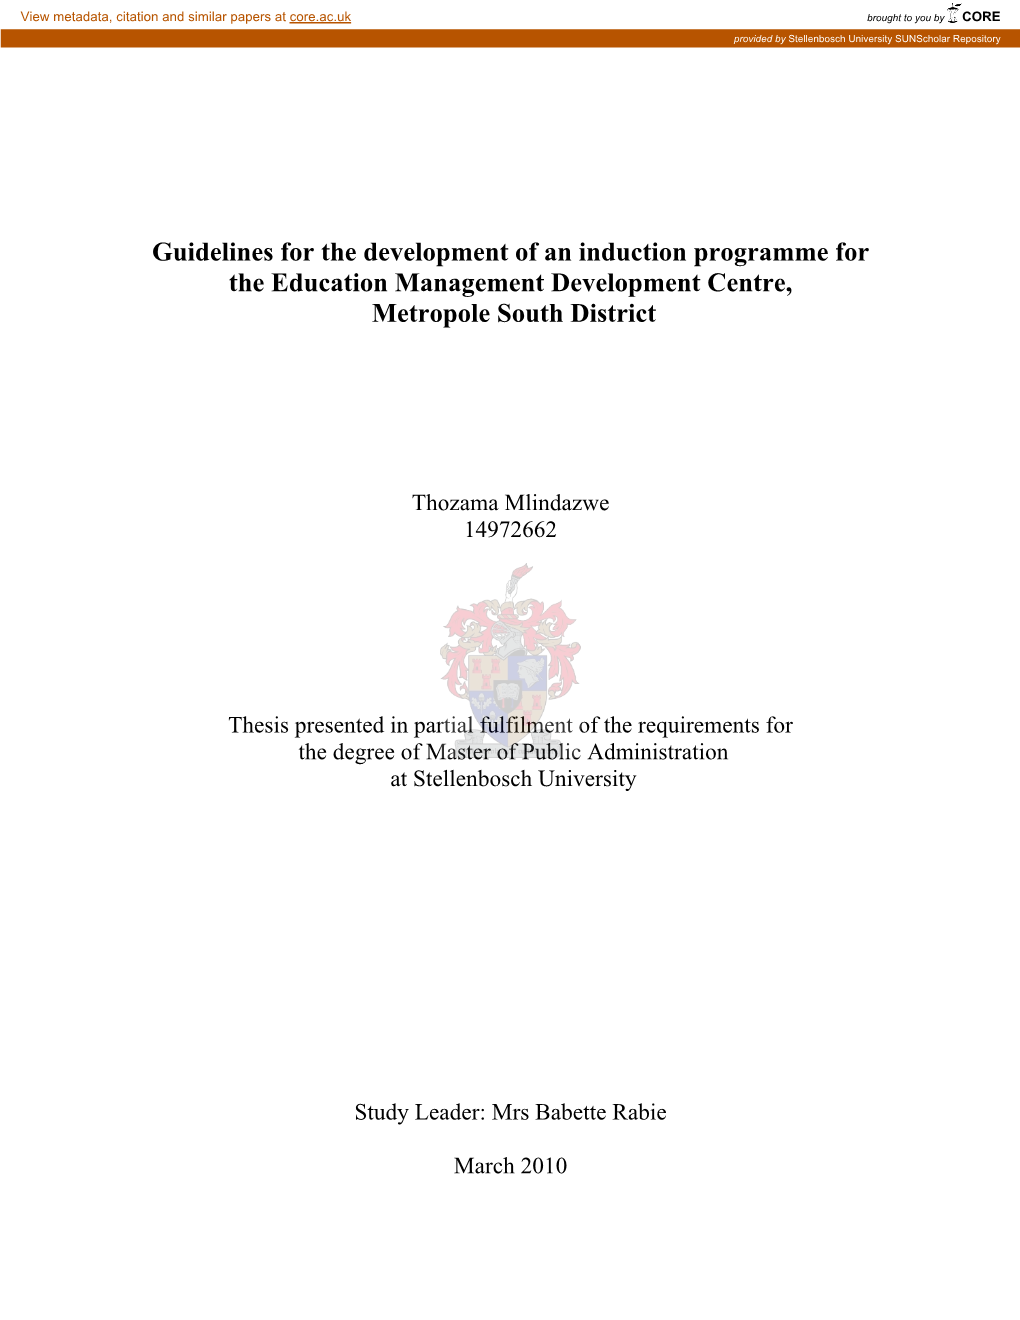 Guidelines for the Development of an Induction Programme for the Education Management Development Centre, Metropole South District